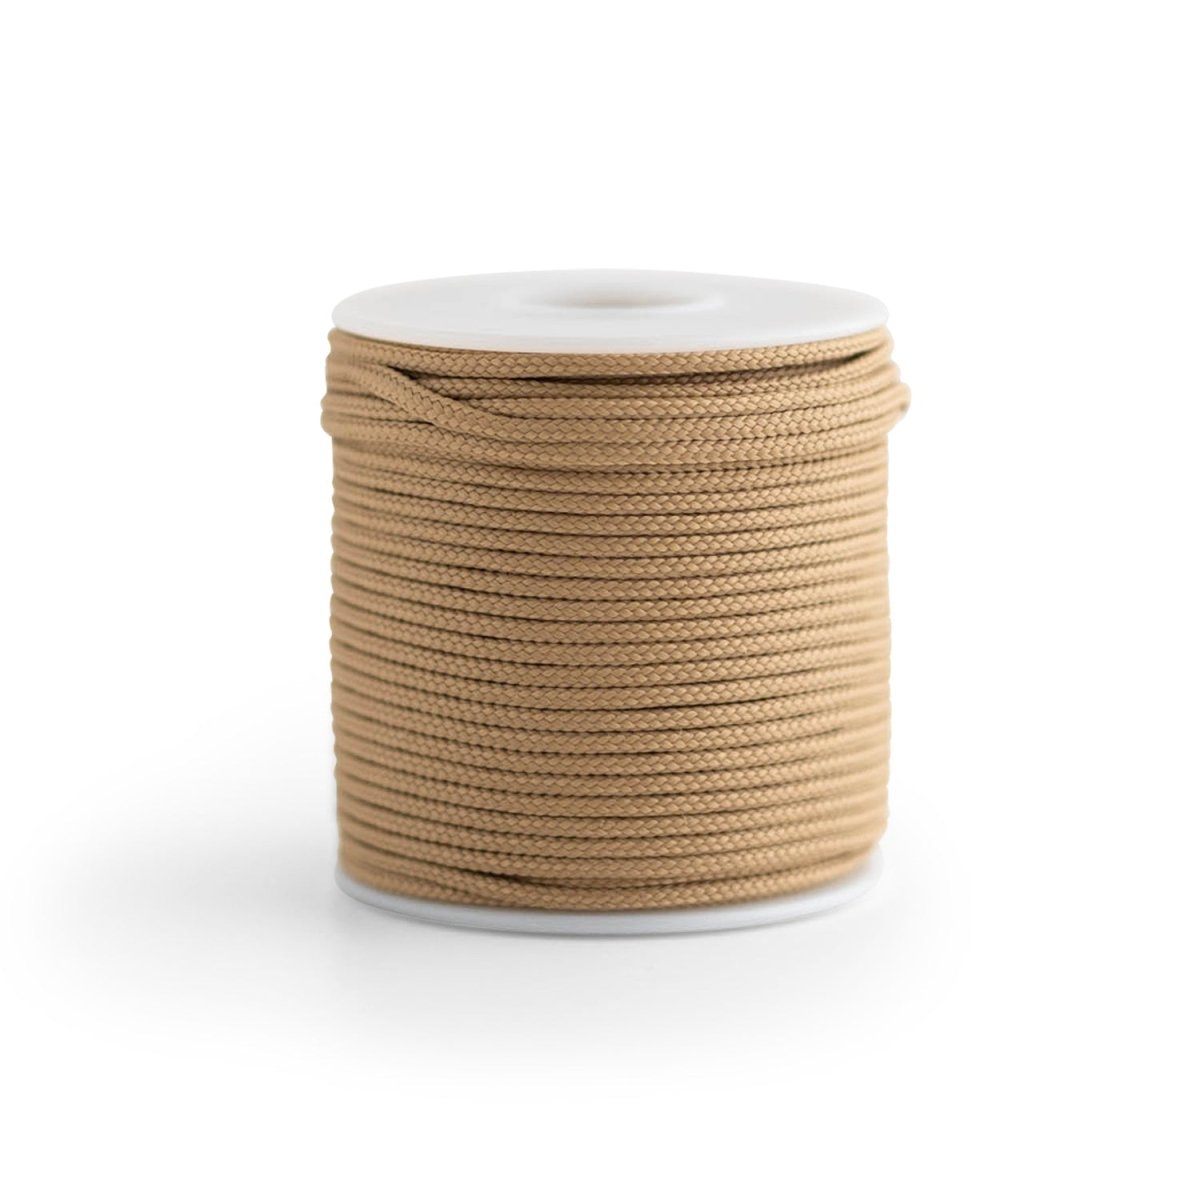 LAST CHANCE Nylon Paracord - Non-Fusing Beige from Cara & Co Craft Supply